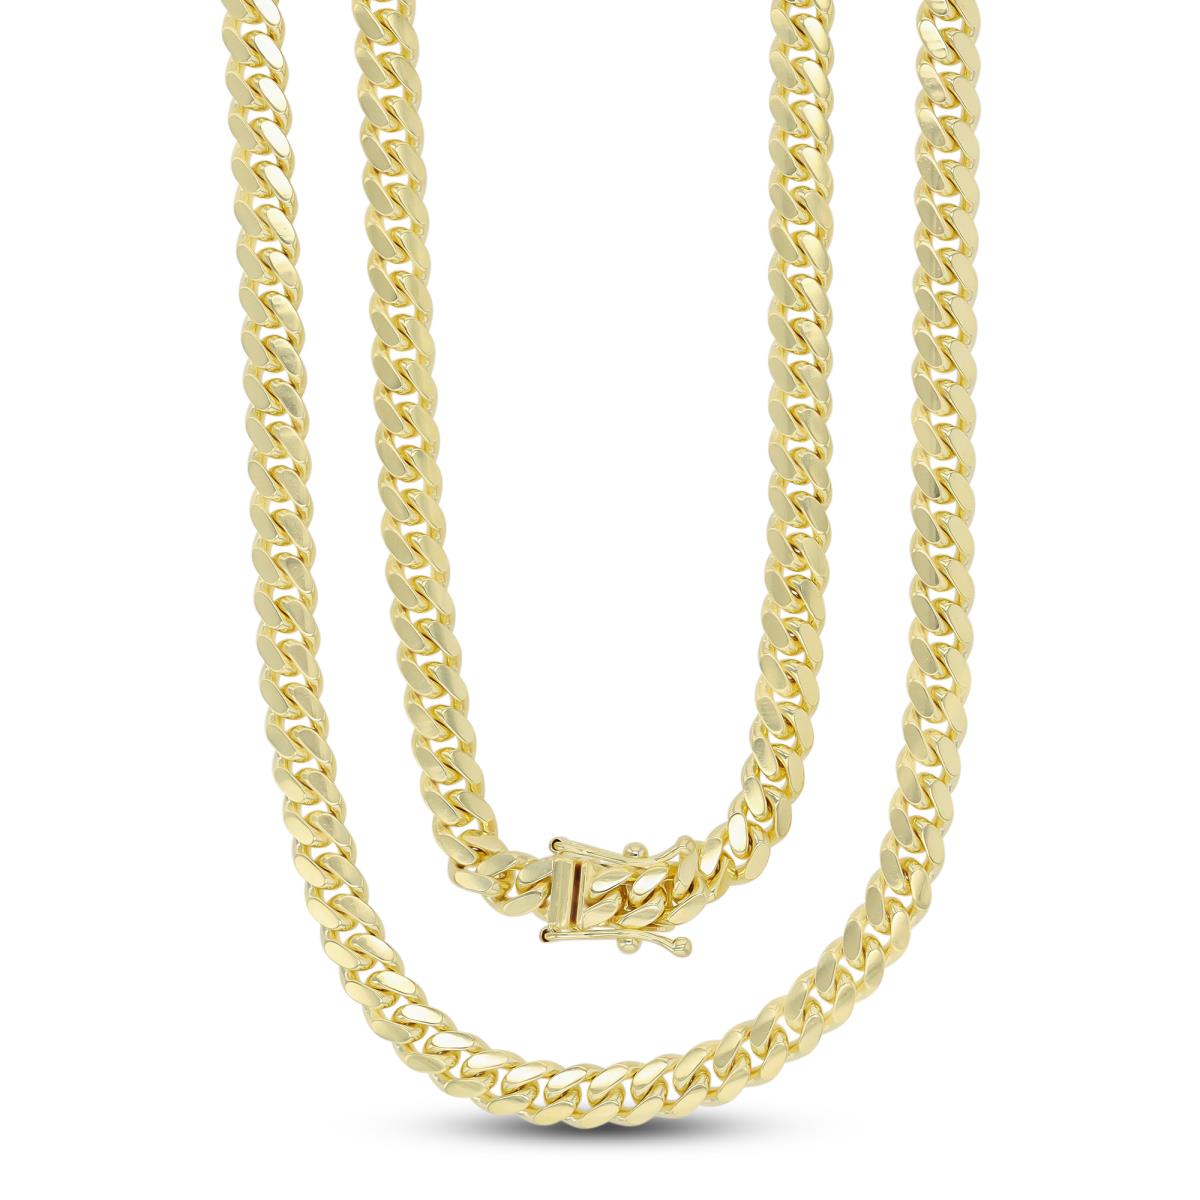 14K Yellow Gold 5mm Solid Miami Cuban 150 22" Chain With Box Lock